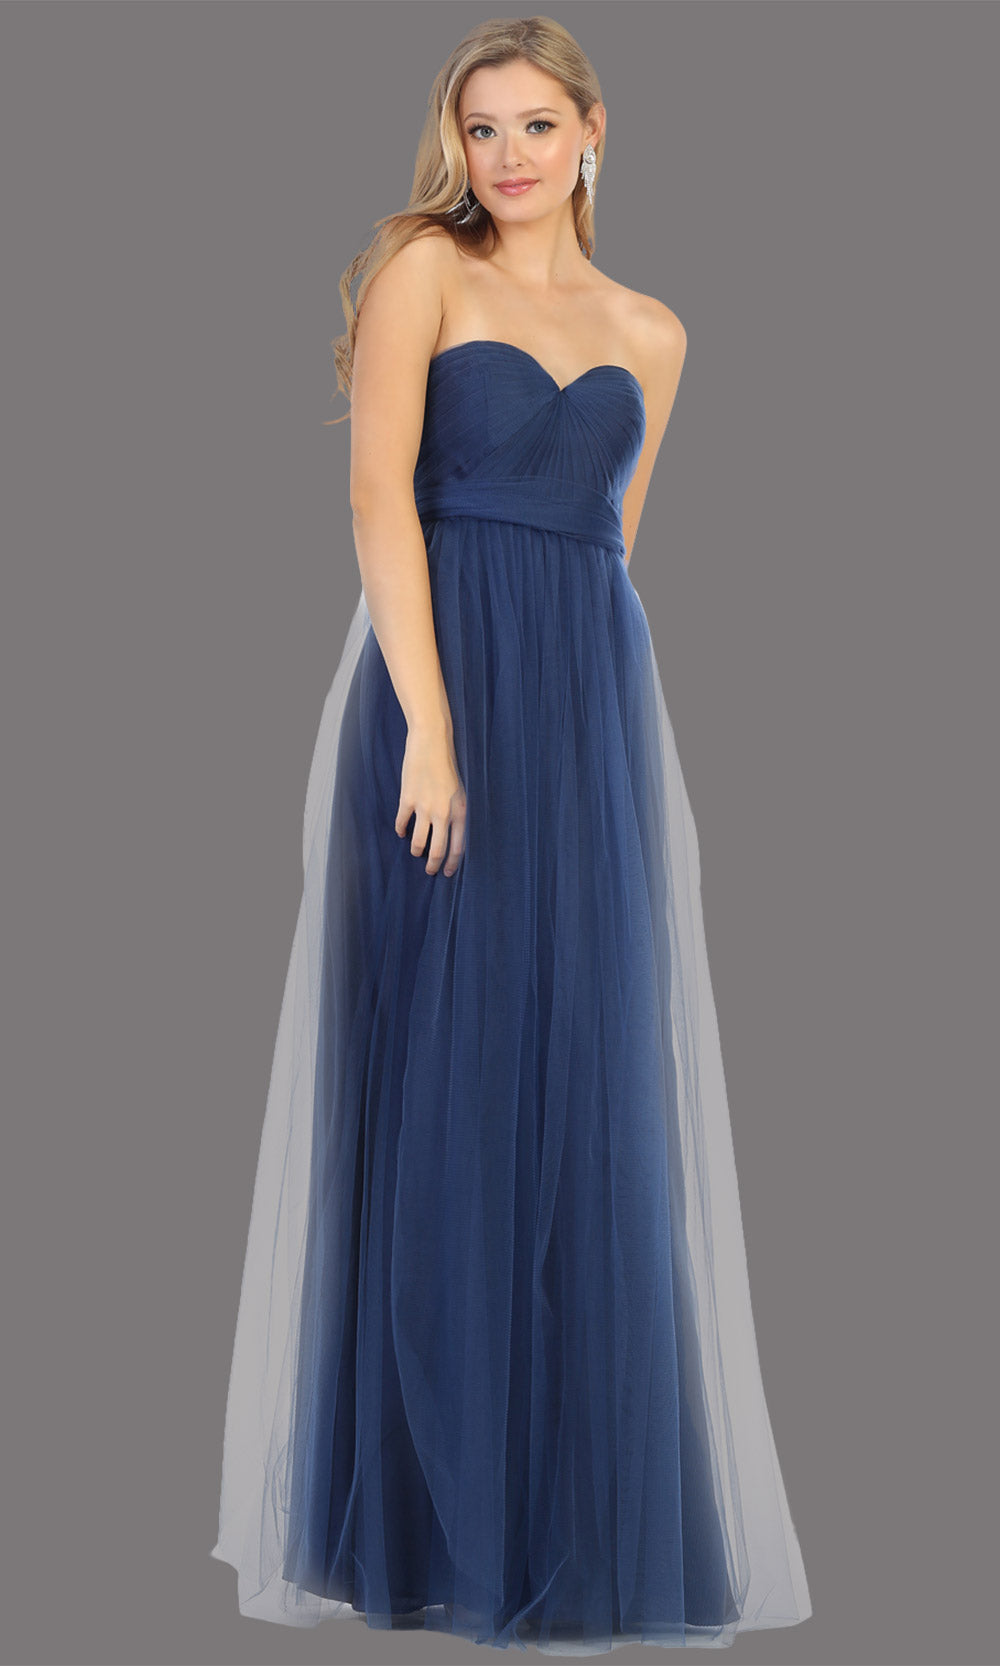 Mayqueen MQ1728 long navy blue flowy tulle mesh dress. Dark blue evening dress is perfect for bridesmaid dresses,formal wedding guest party dress.This multiway convertible tulle dress allows you to wear a dress w/different necklines.Plus sizes avail